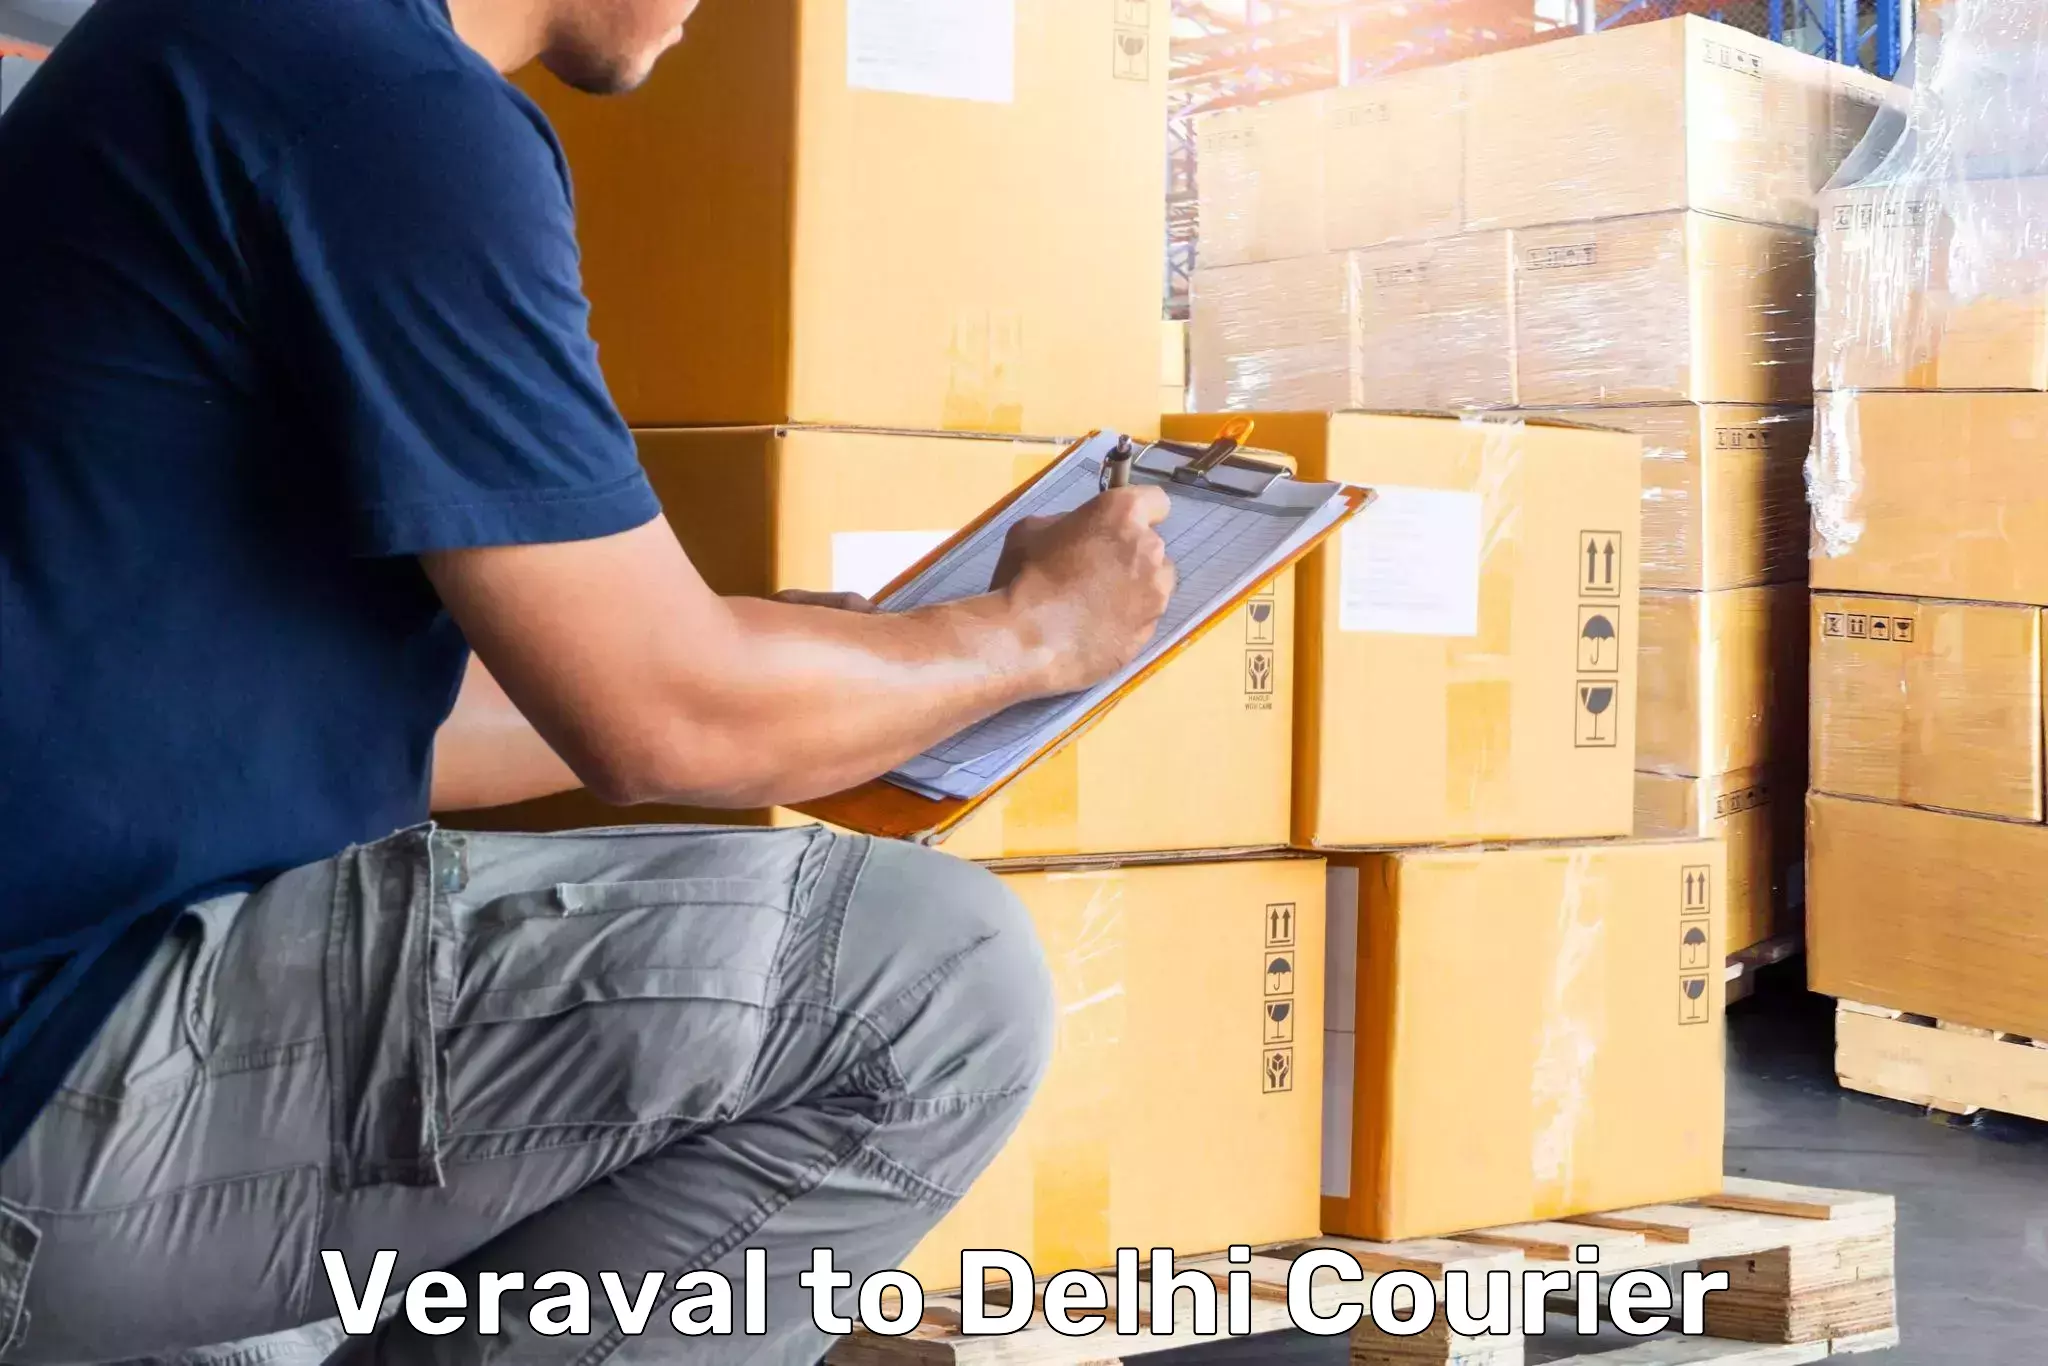 Baggage delivery technology Veraval to Delhi